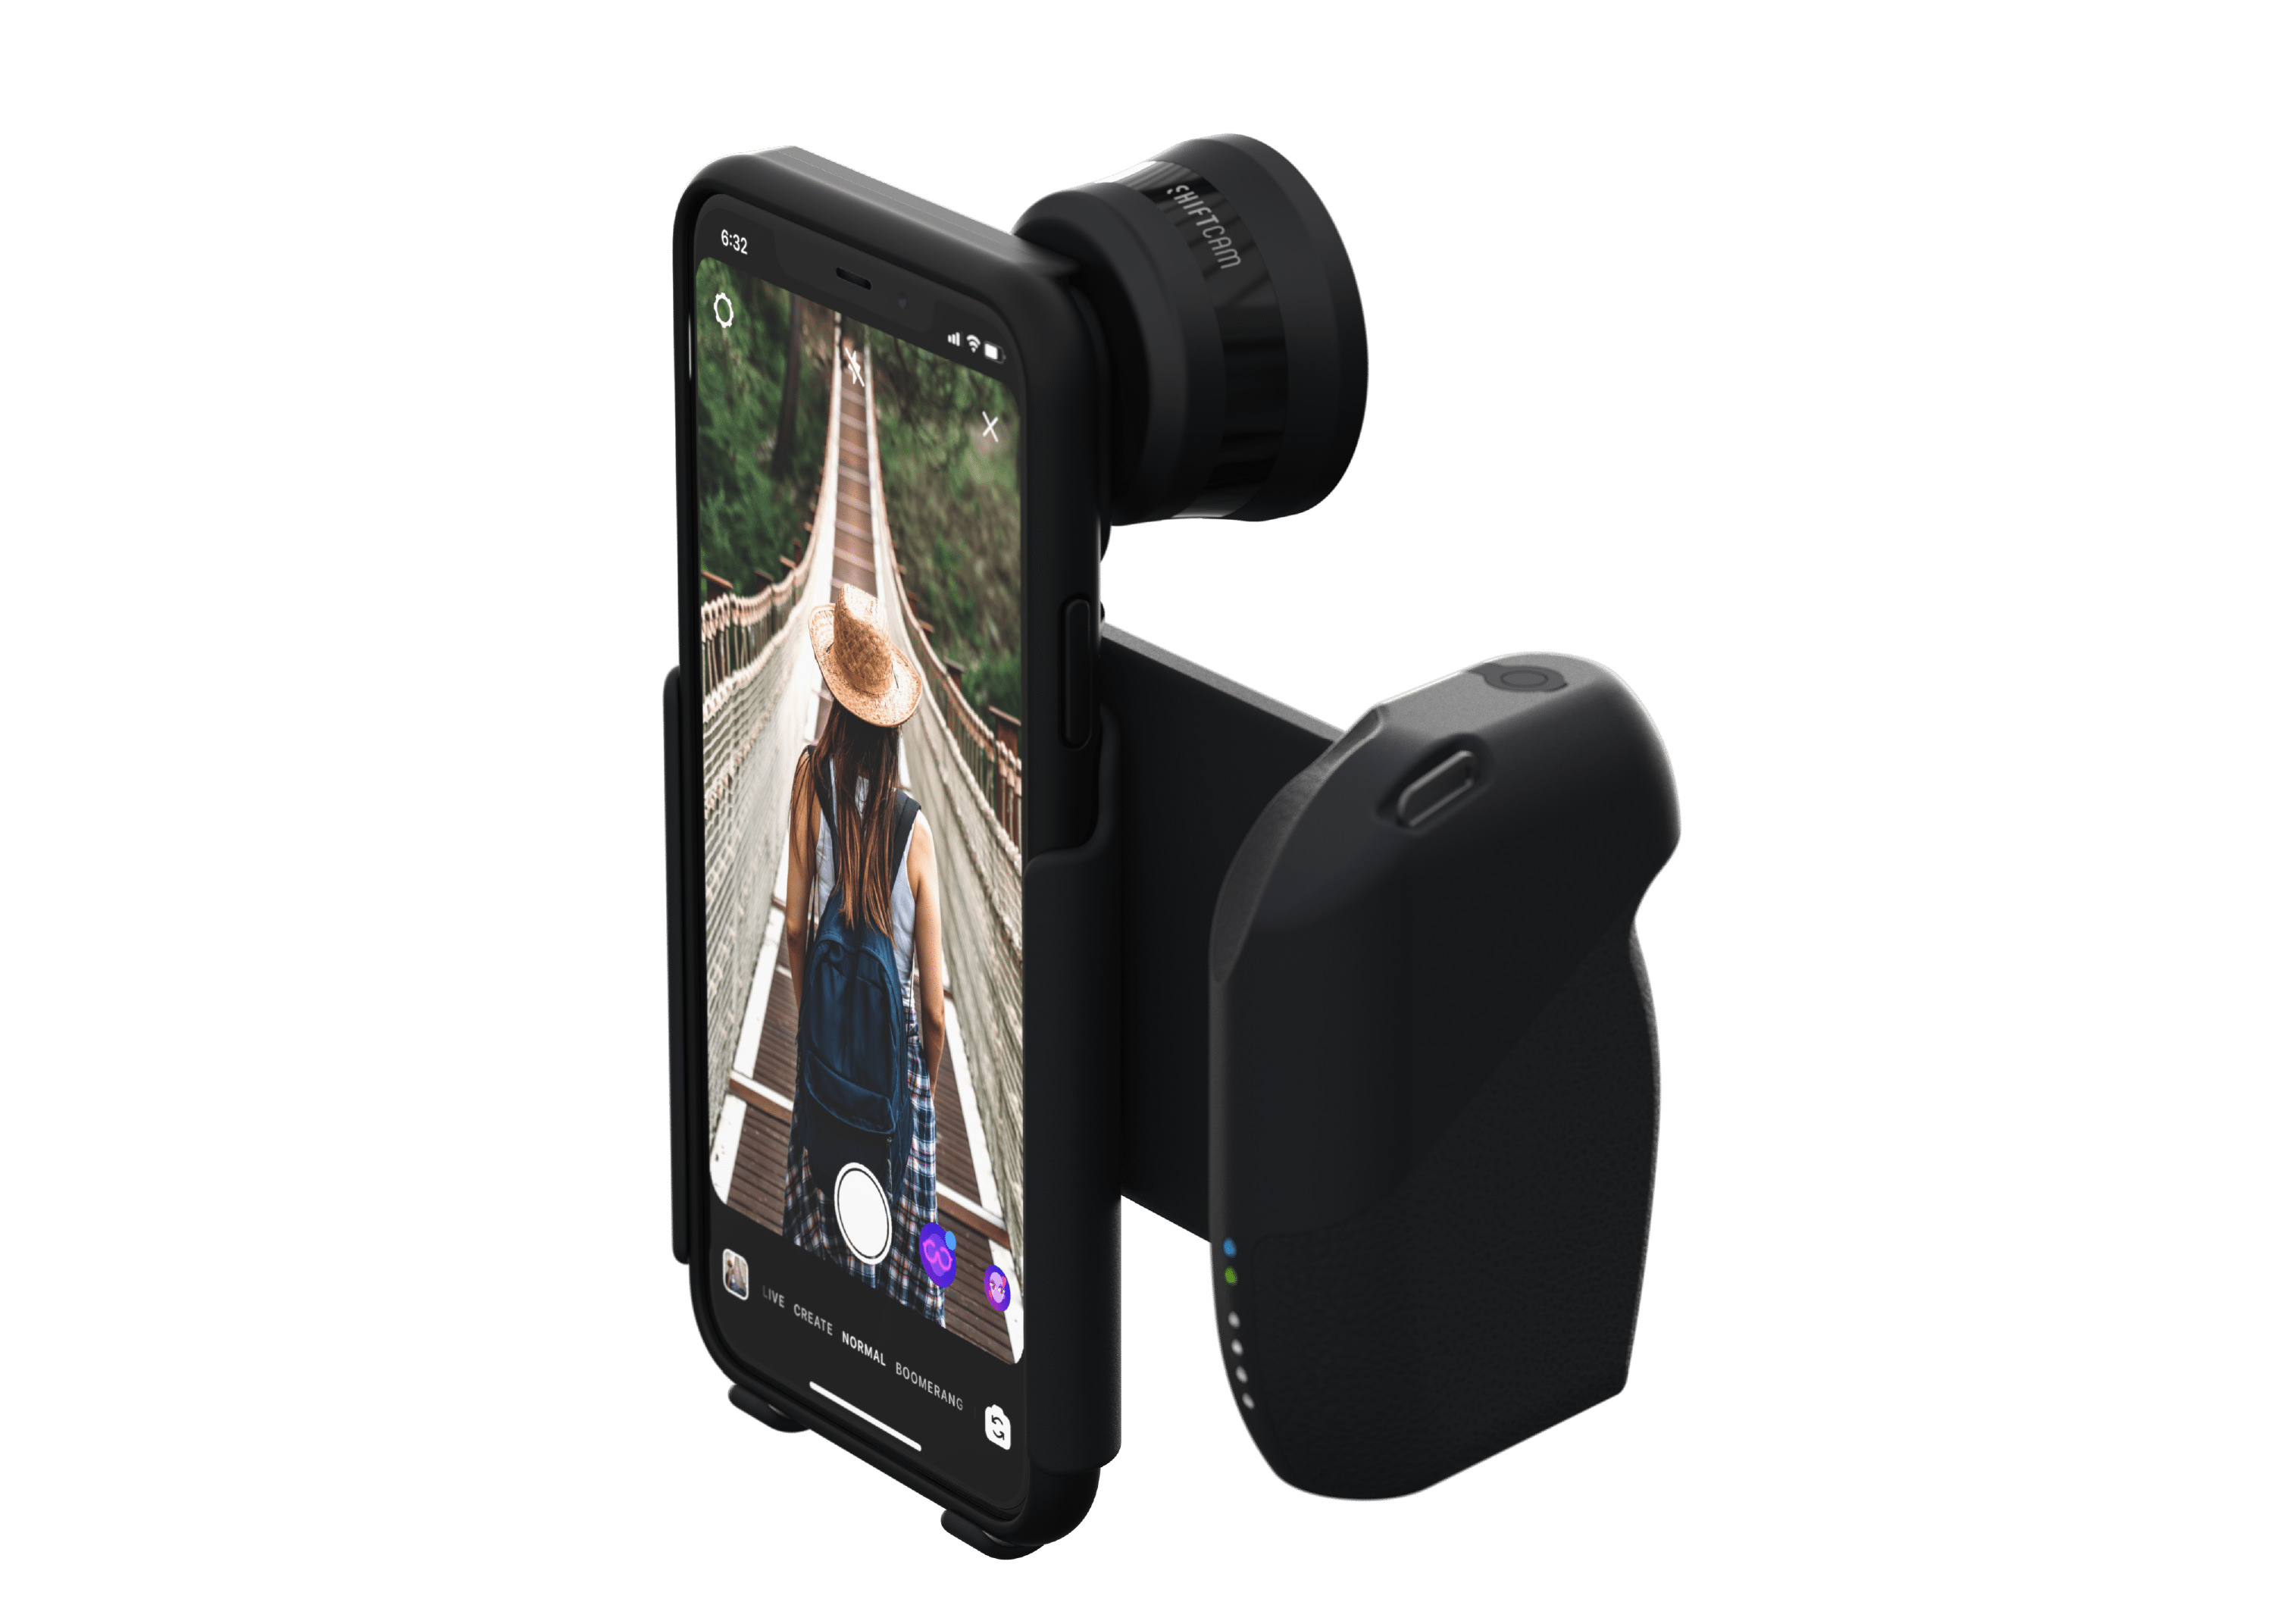 ShiftCam ProGrip Is a Mobile Multifunctional Battery Grip - Exibart Street